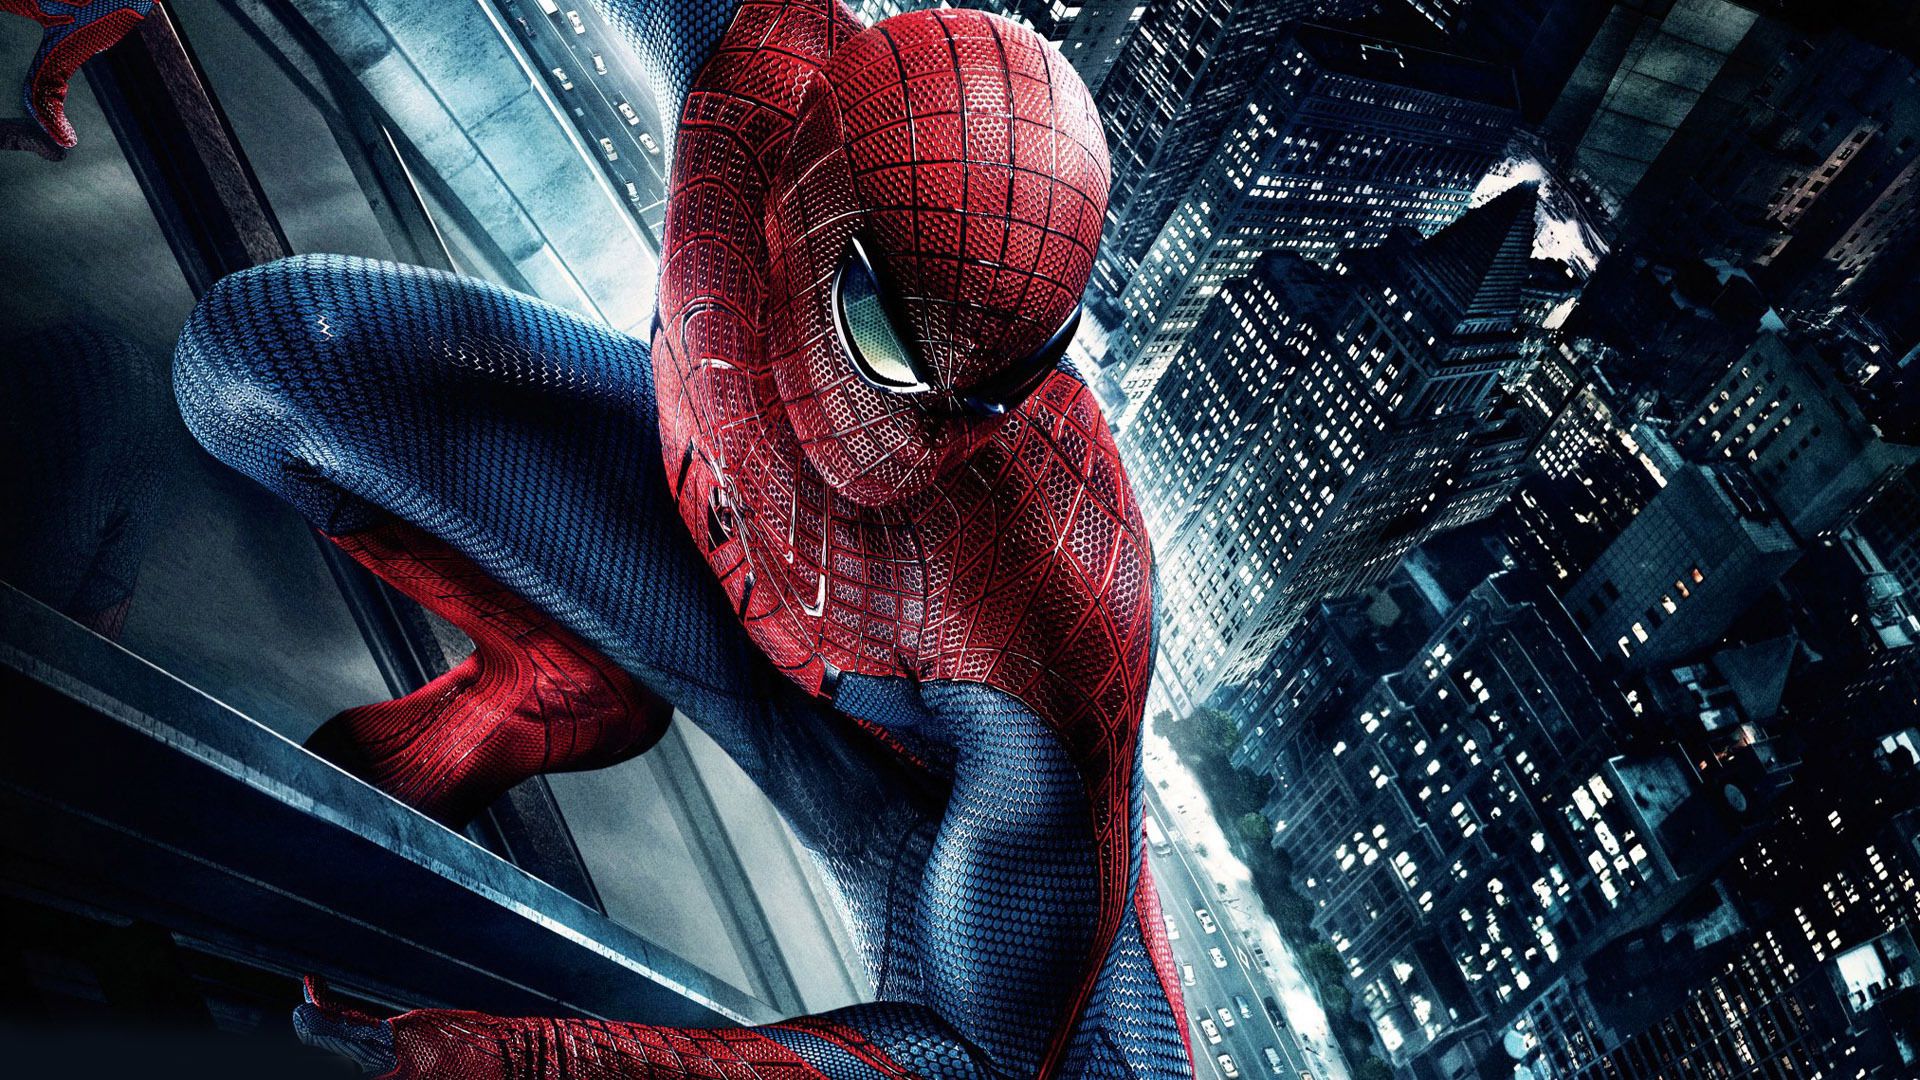 The Amazing Spider-Man wallpaper - Free Wide HD Wallpaper